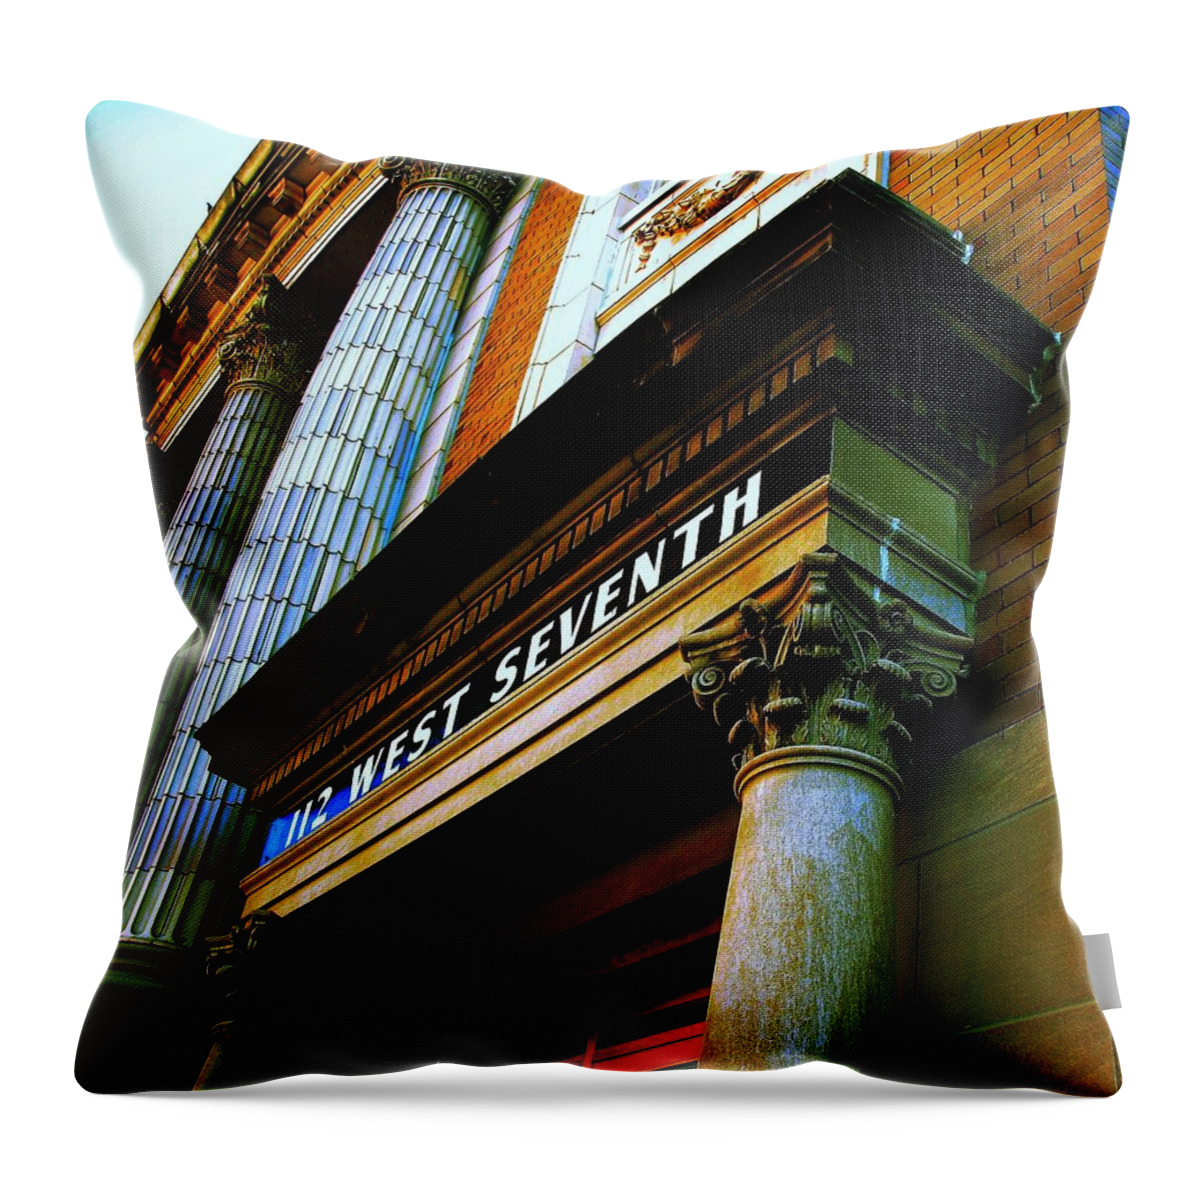 Building Throw Pillow featuring the photograph 112 West Seventh by Susan Hickam